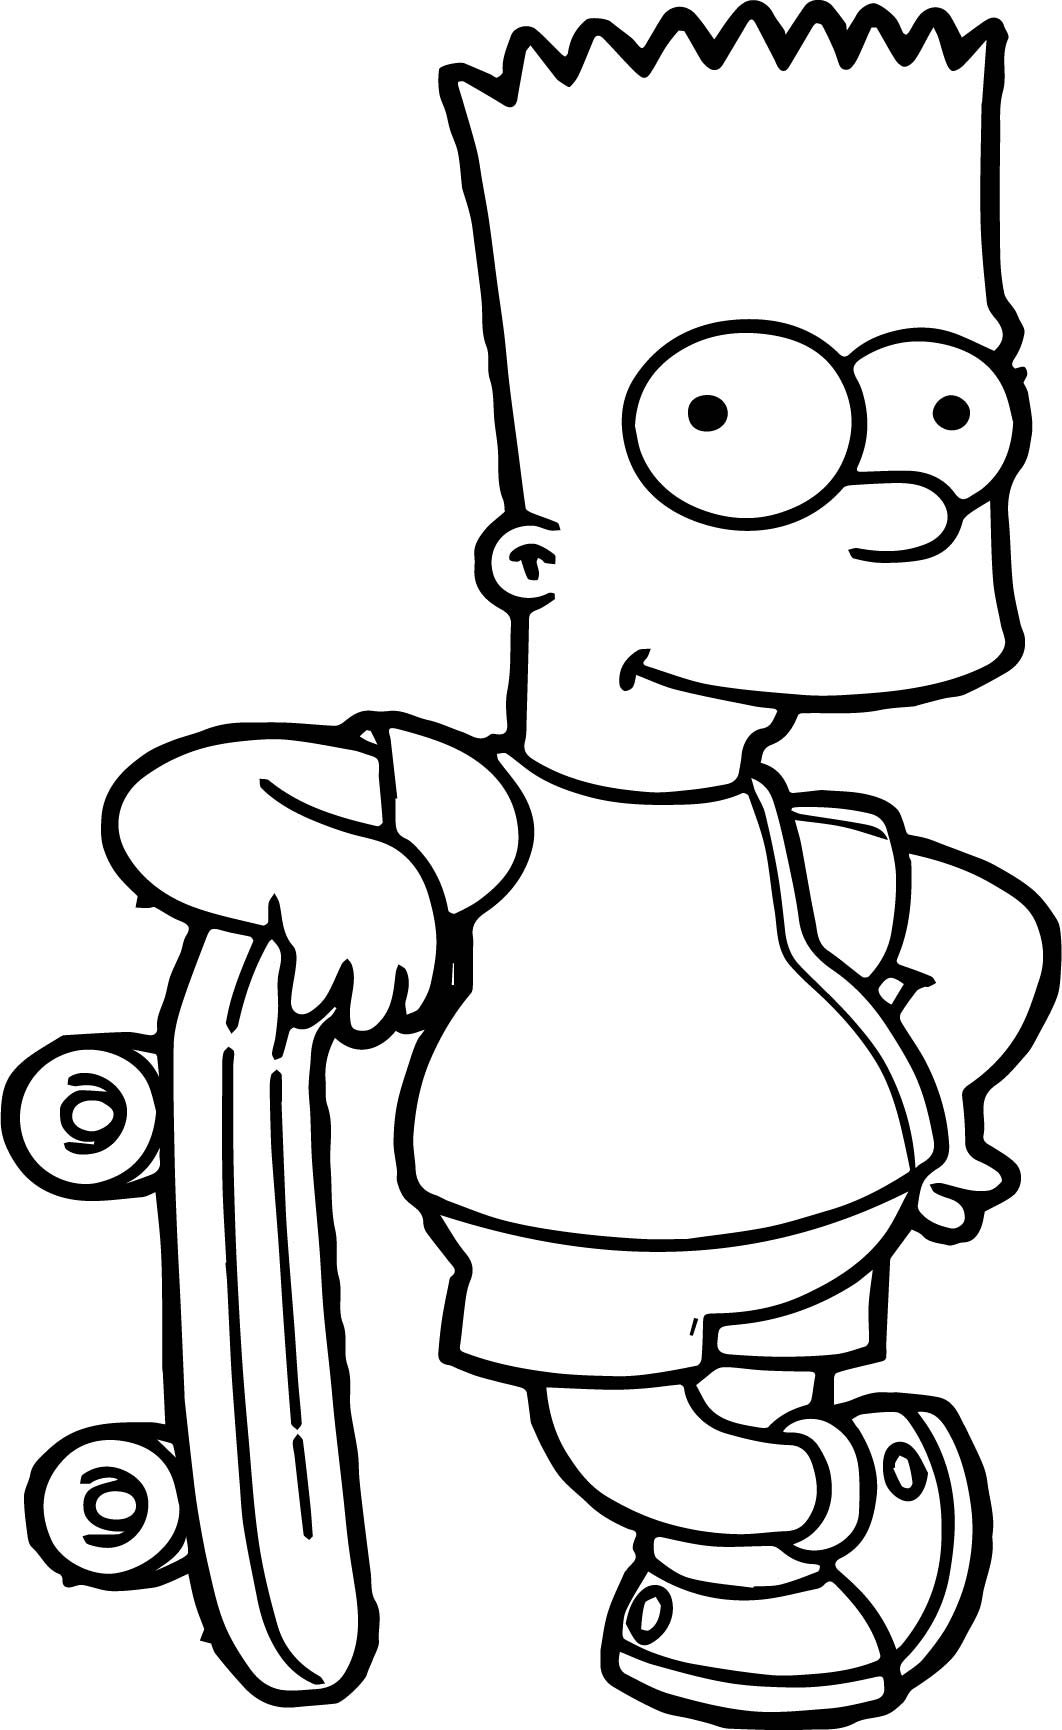 Bart Simpson The Simpsons Version Coloring Page